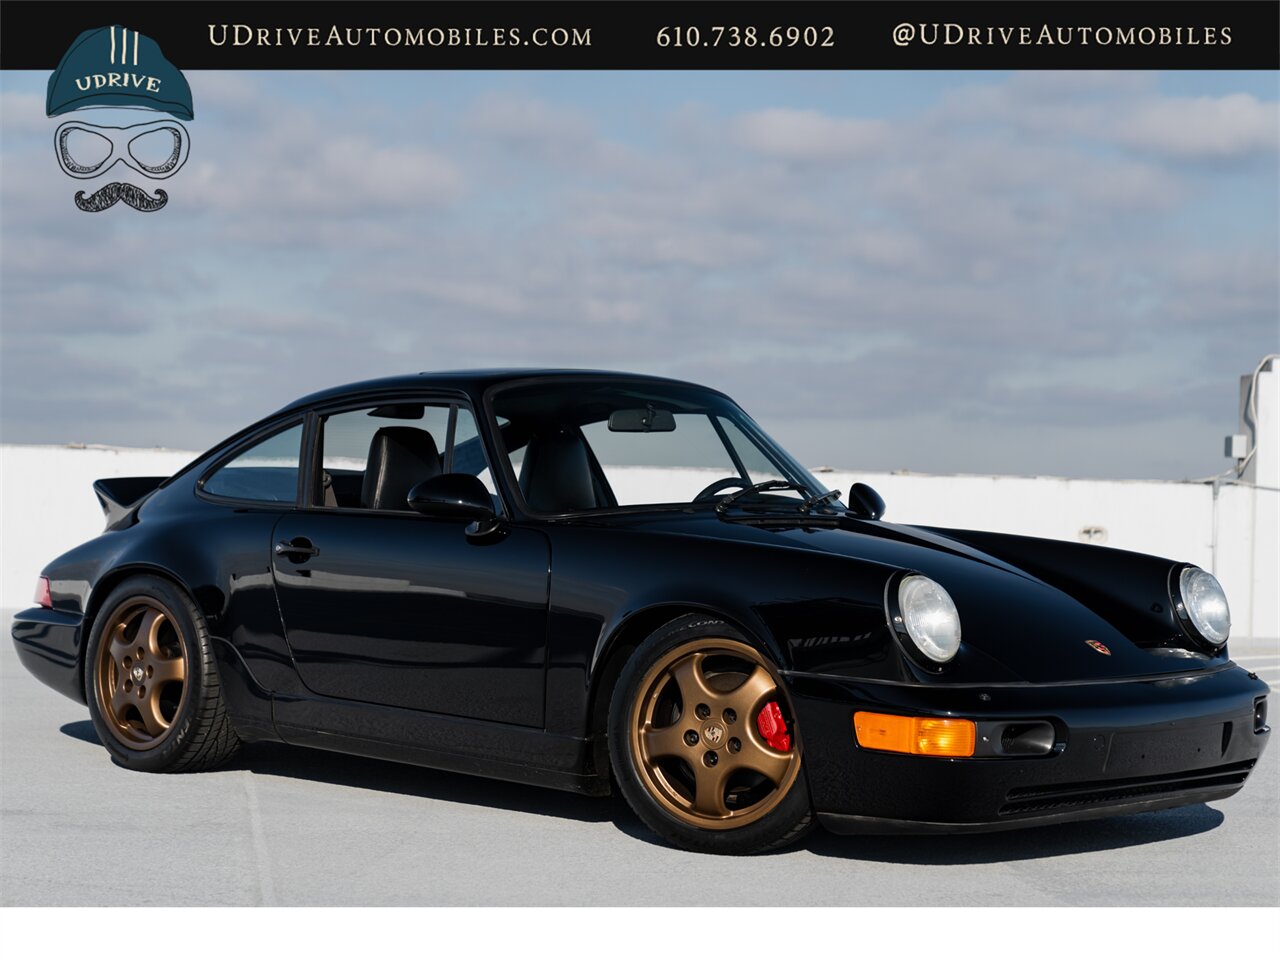 1989 Porsche 911 C4  964 Carrera 4 C4 5 Speed Manual $33k in Recent Service History - Photo 3 - West Chester, PA 19382